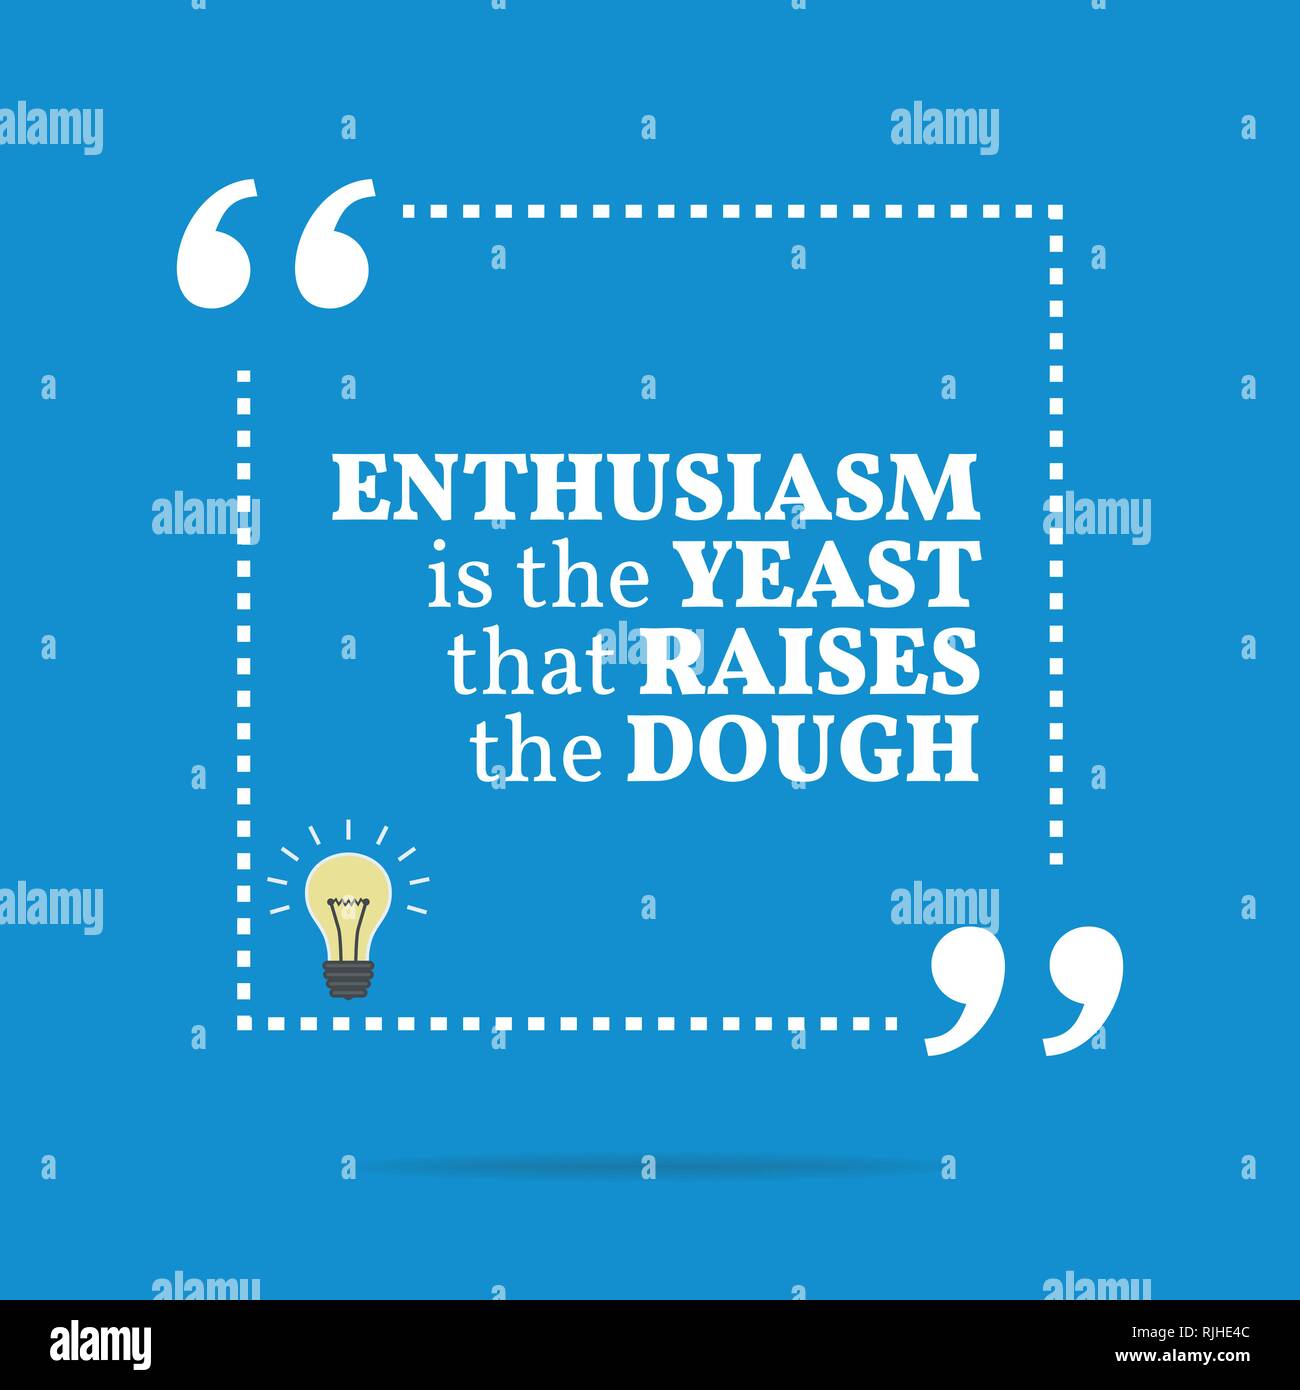 Inspirational motivational quote. Enthusiasm is the yeast that raises the dough. Simple trendy design. Stock Vector